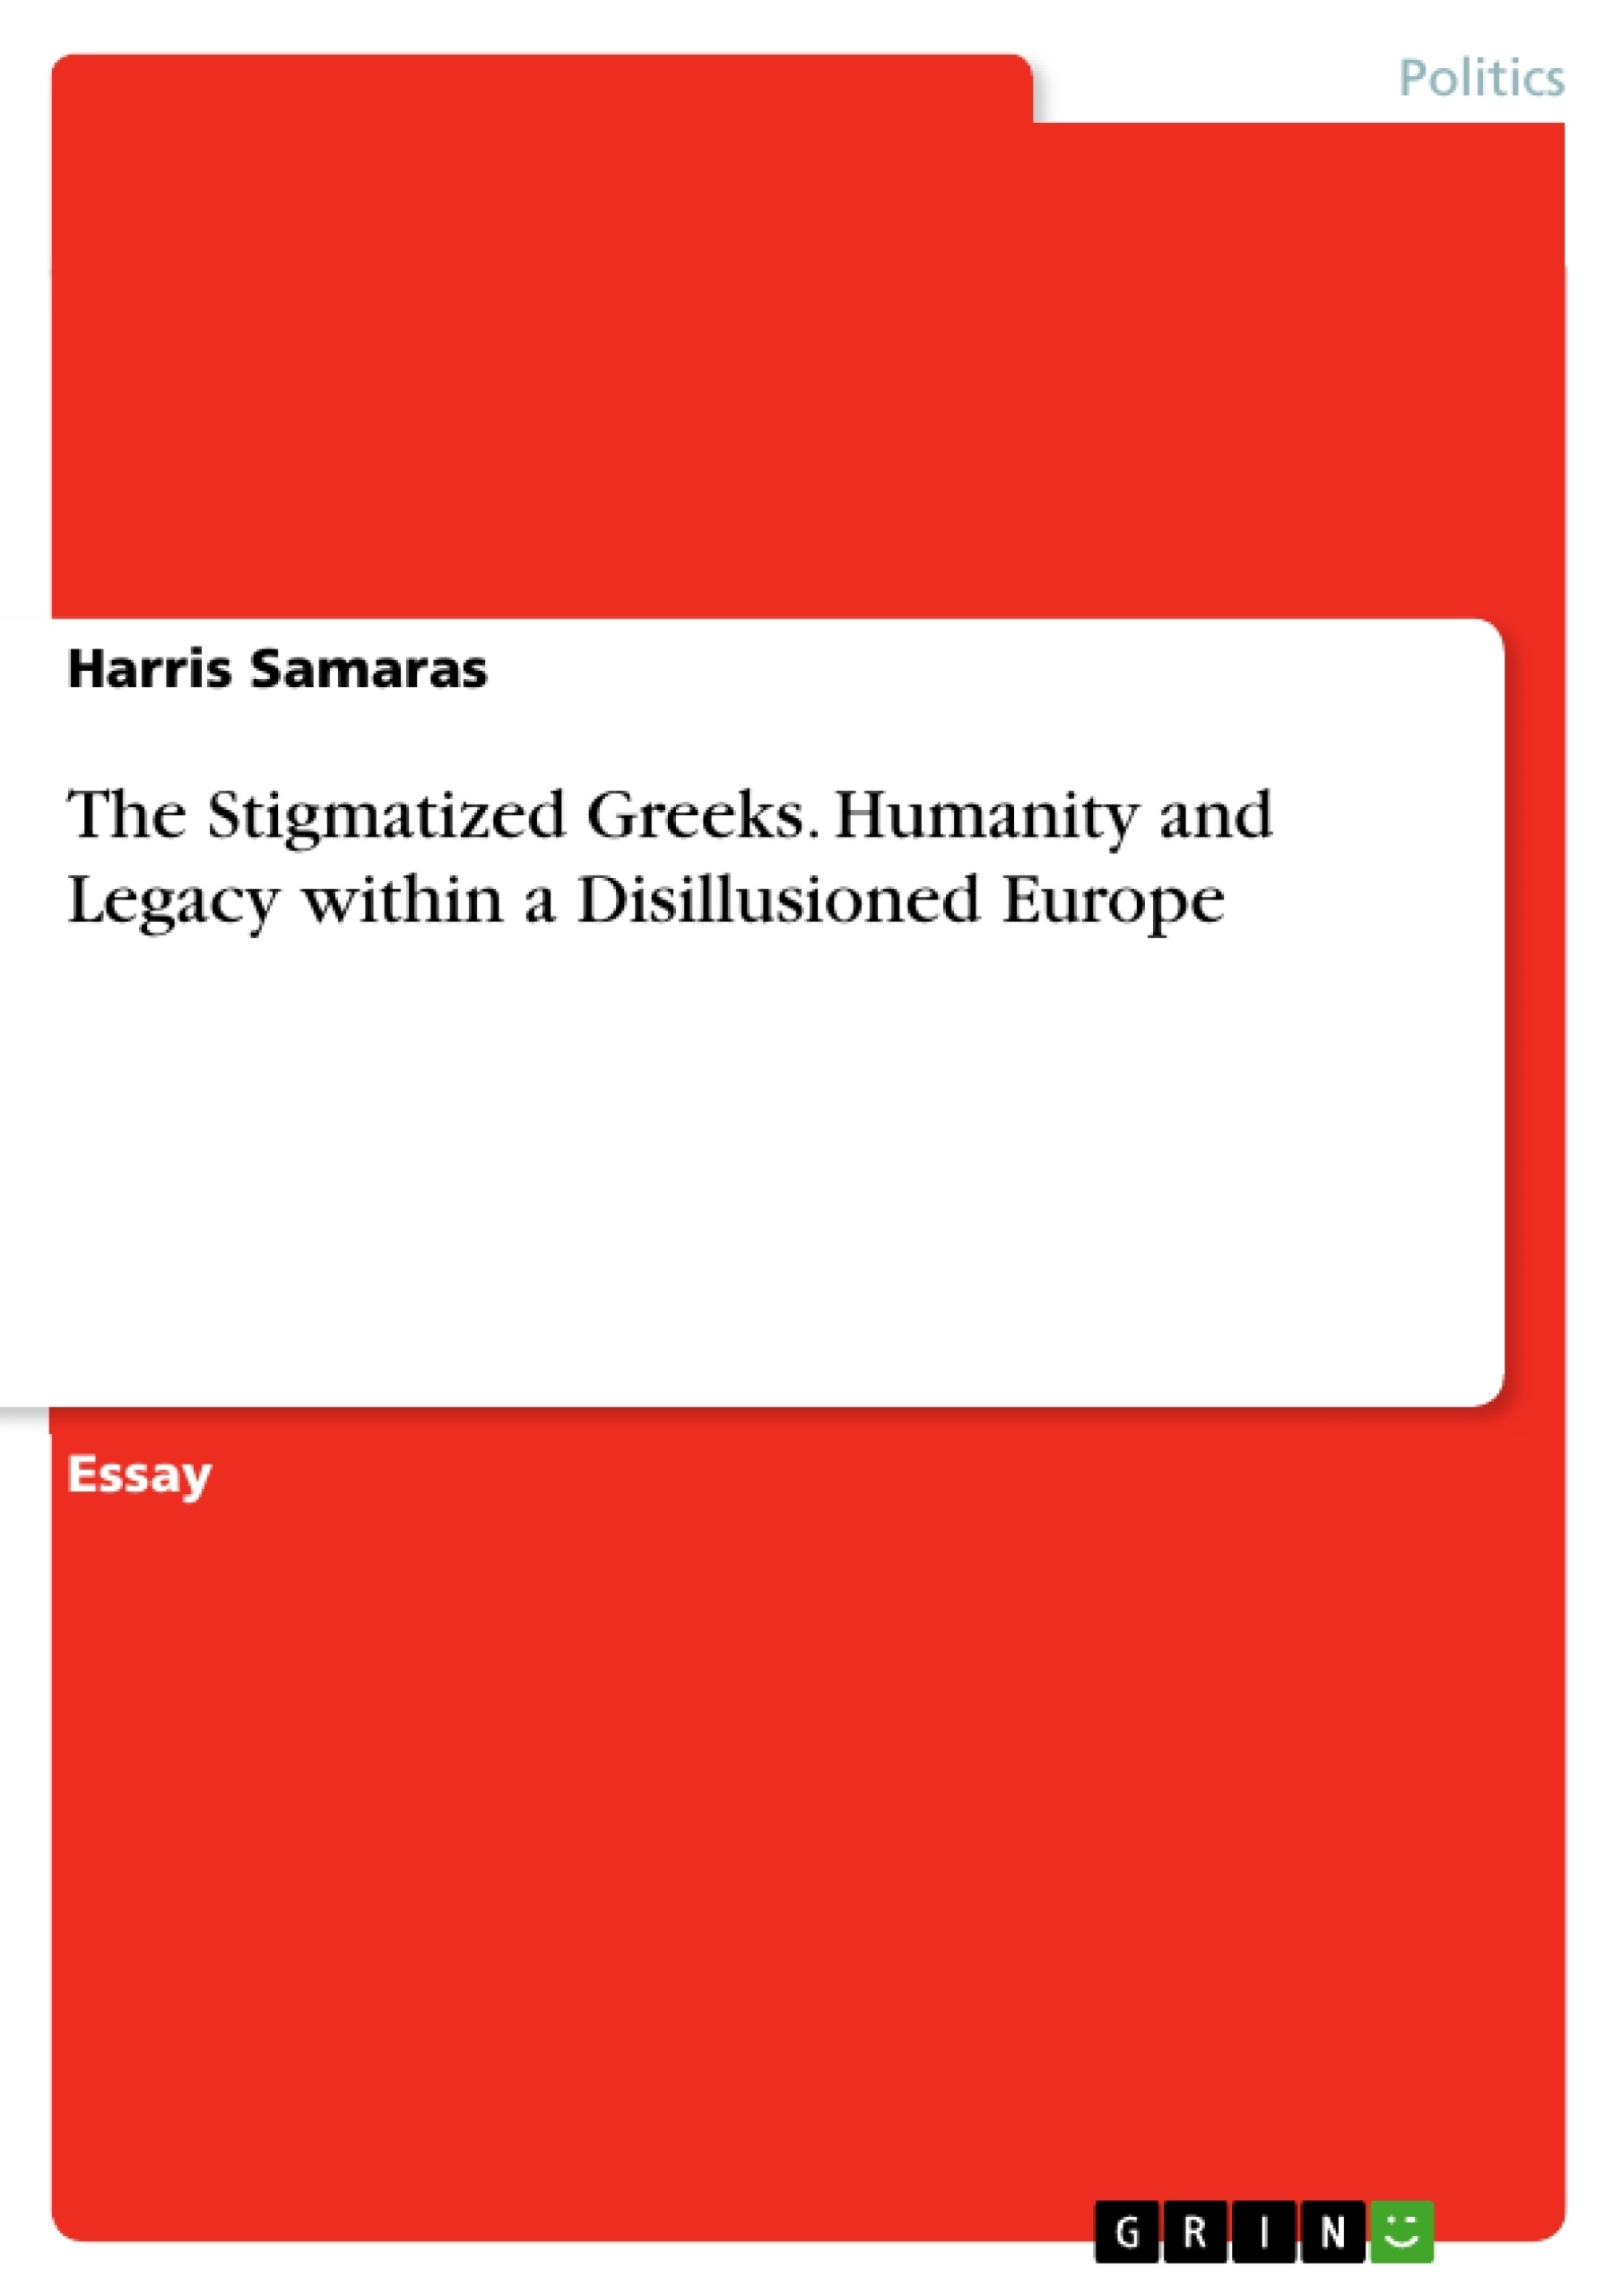 Title: The Stigmatized Greeks. Humanity and Legacy within a Disillusioned Europe